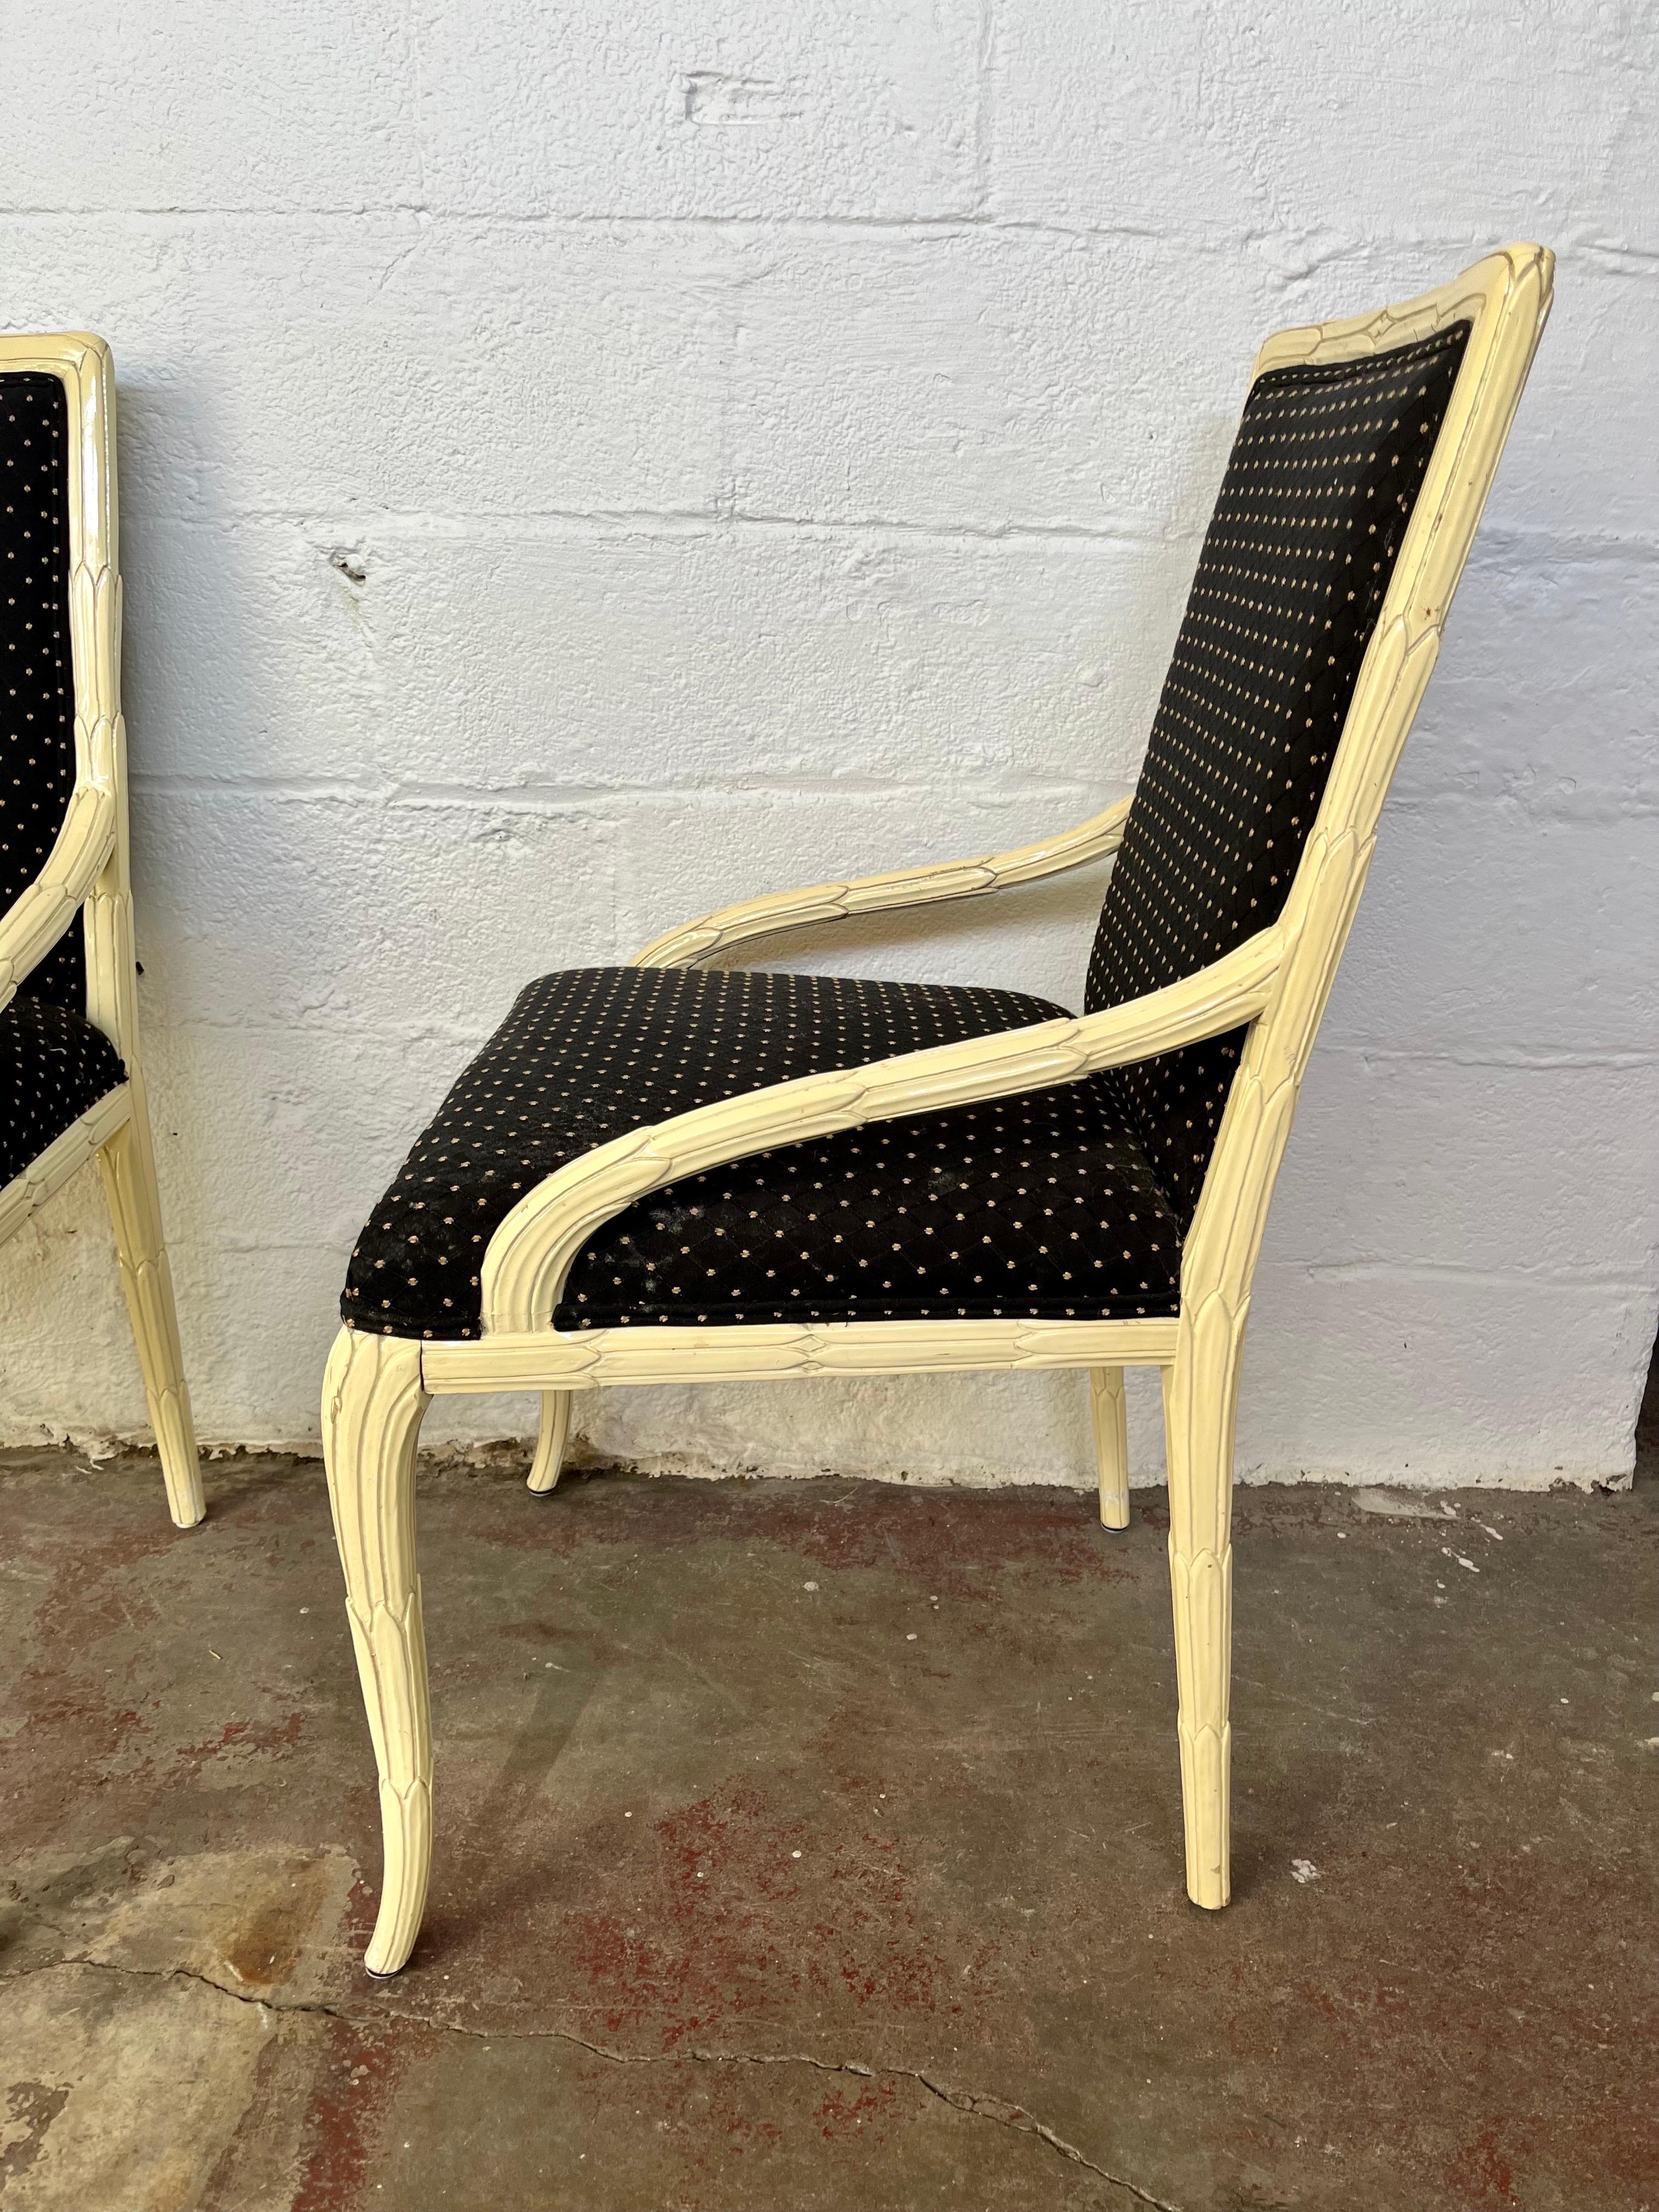 American Vintage Hollywood Regency Lacquer Palm Frond Dining Chairs For Sale